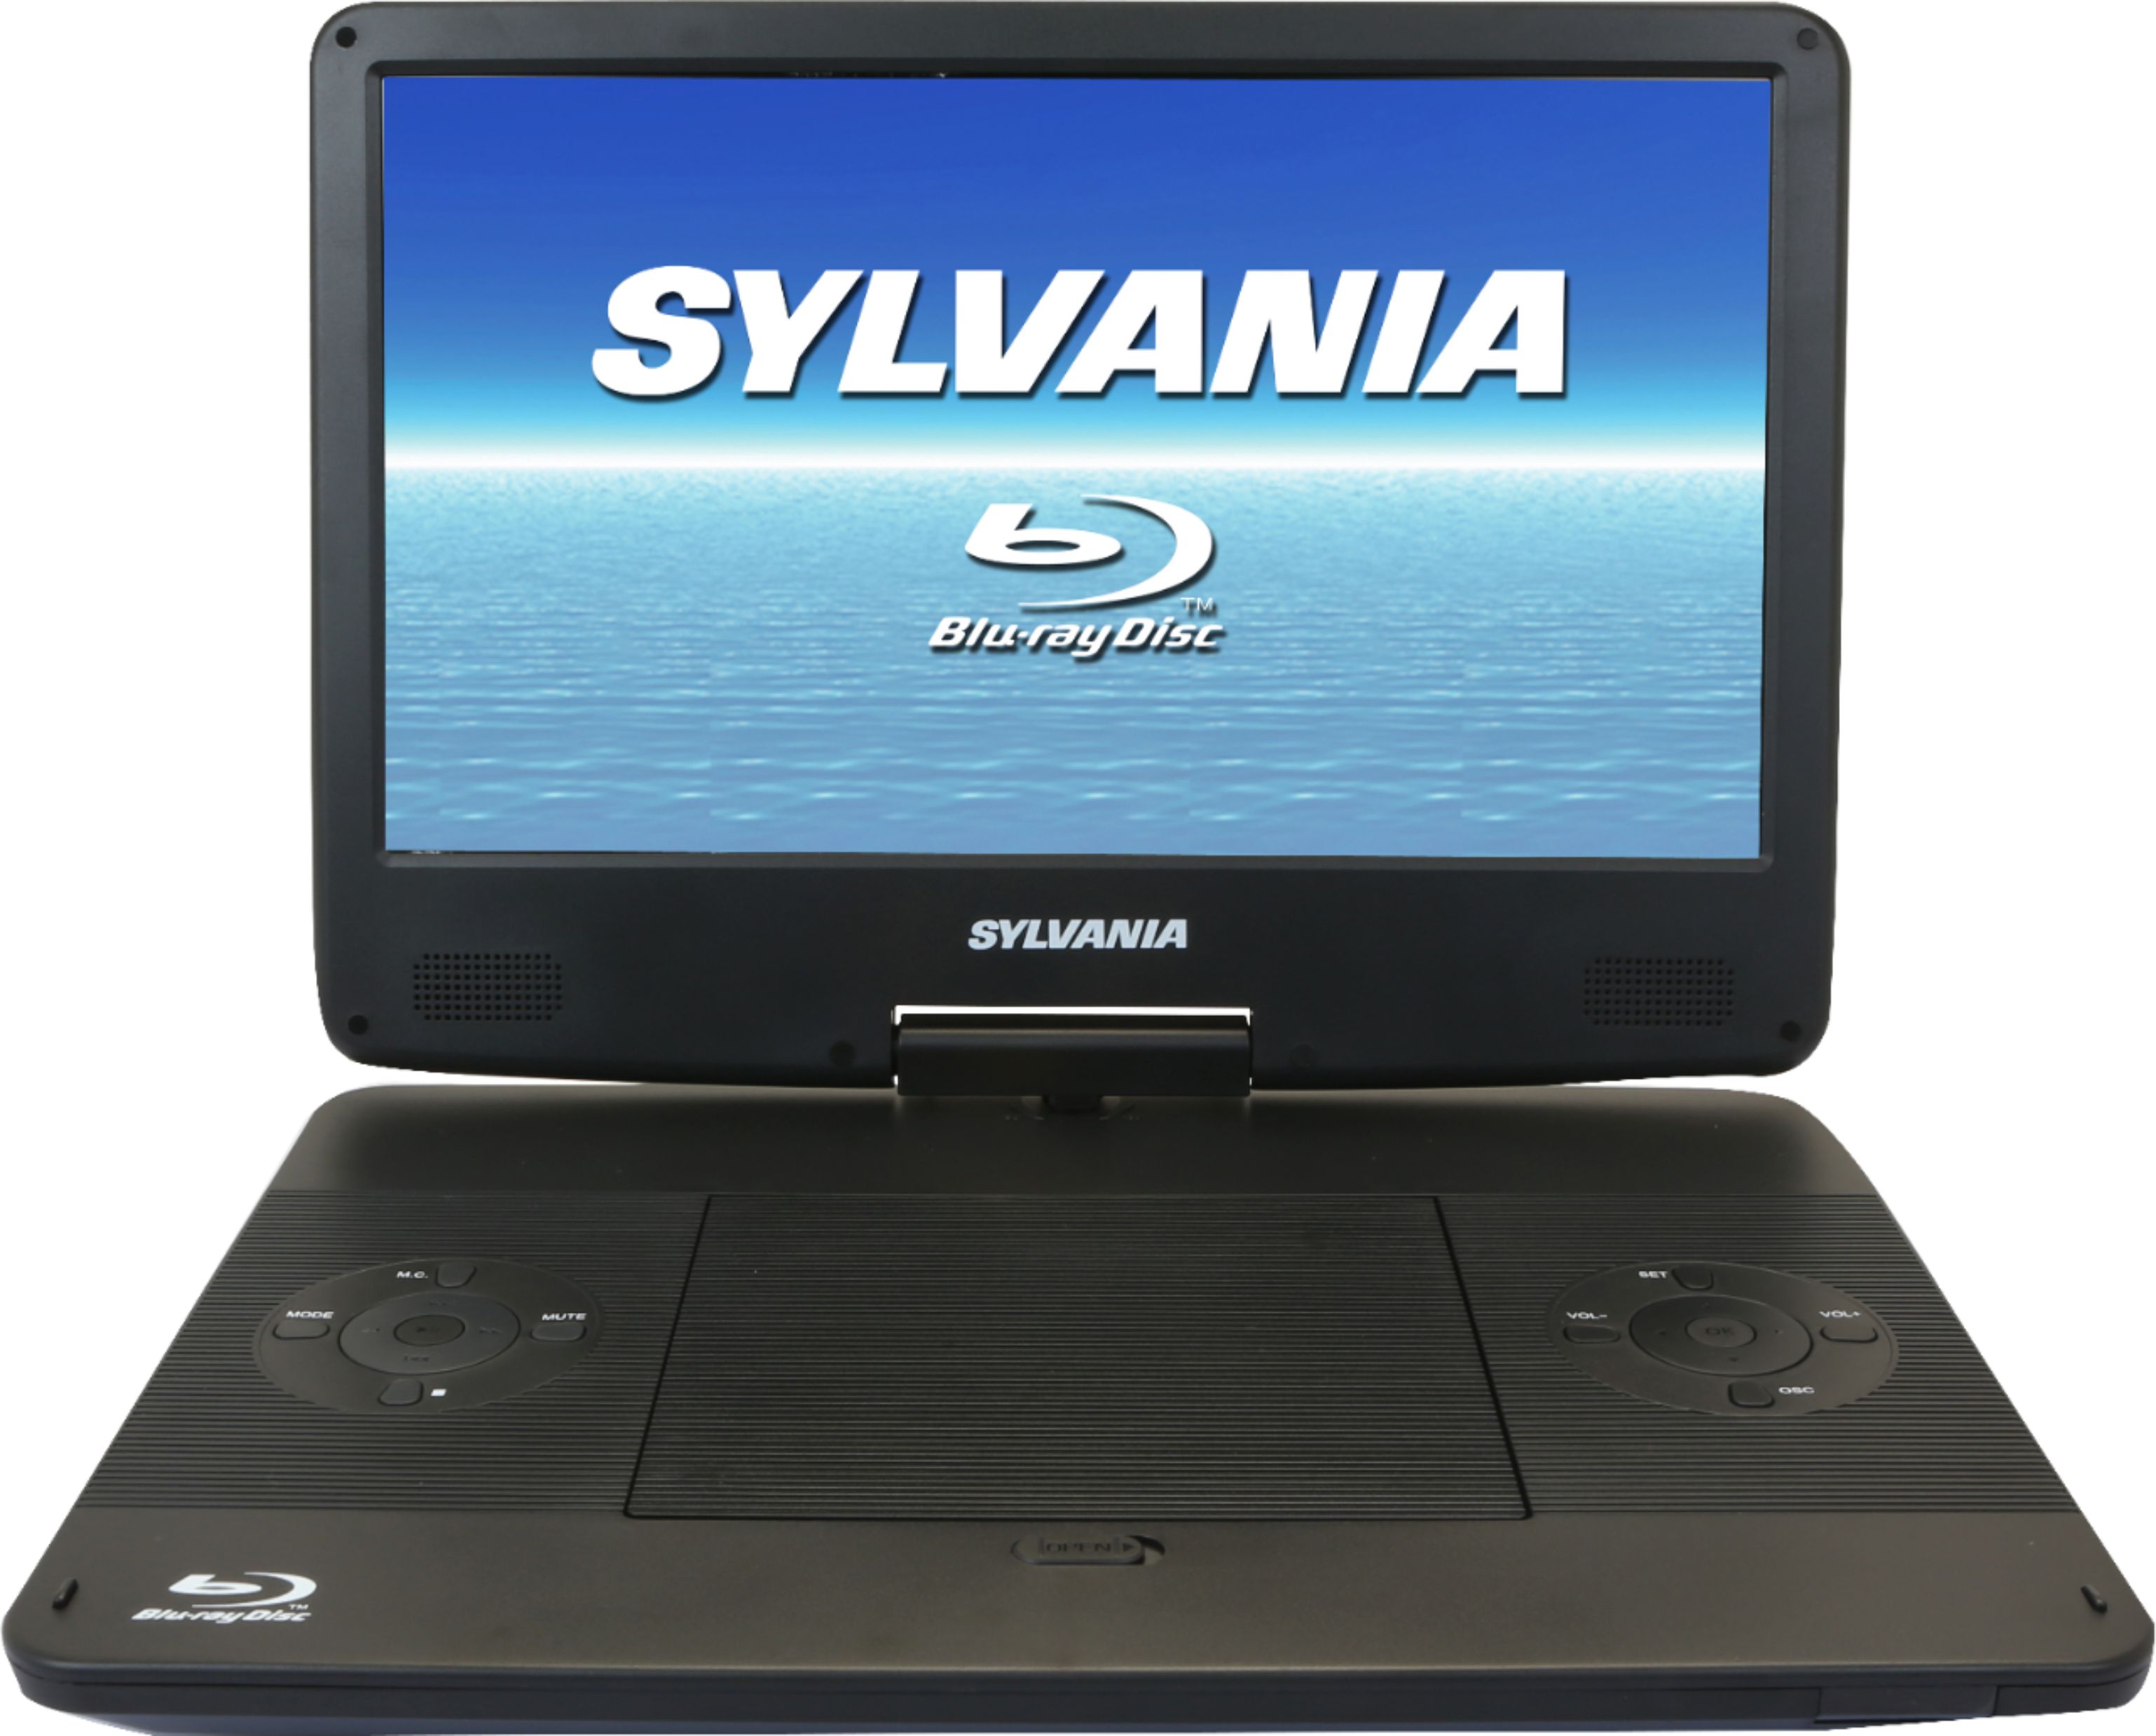 DVD Players for sale in Lulu, Florida